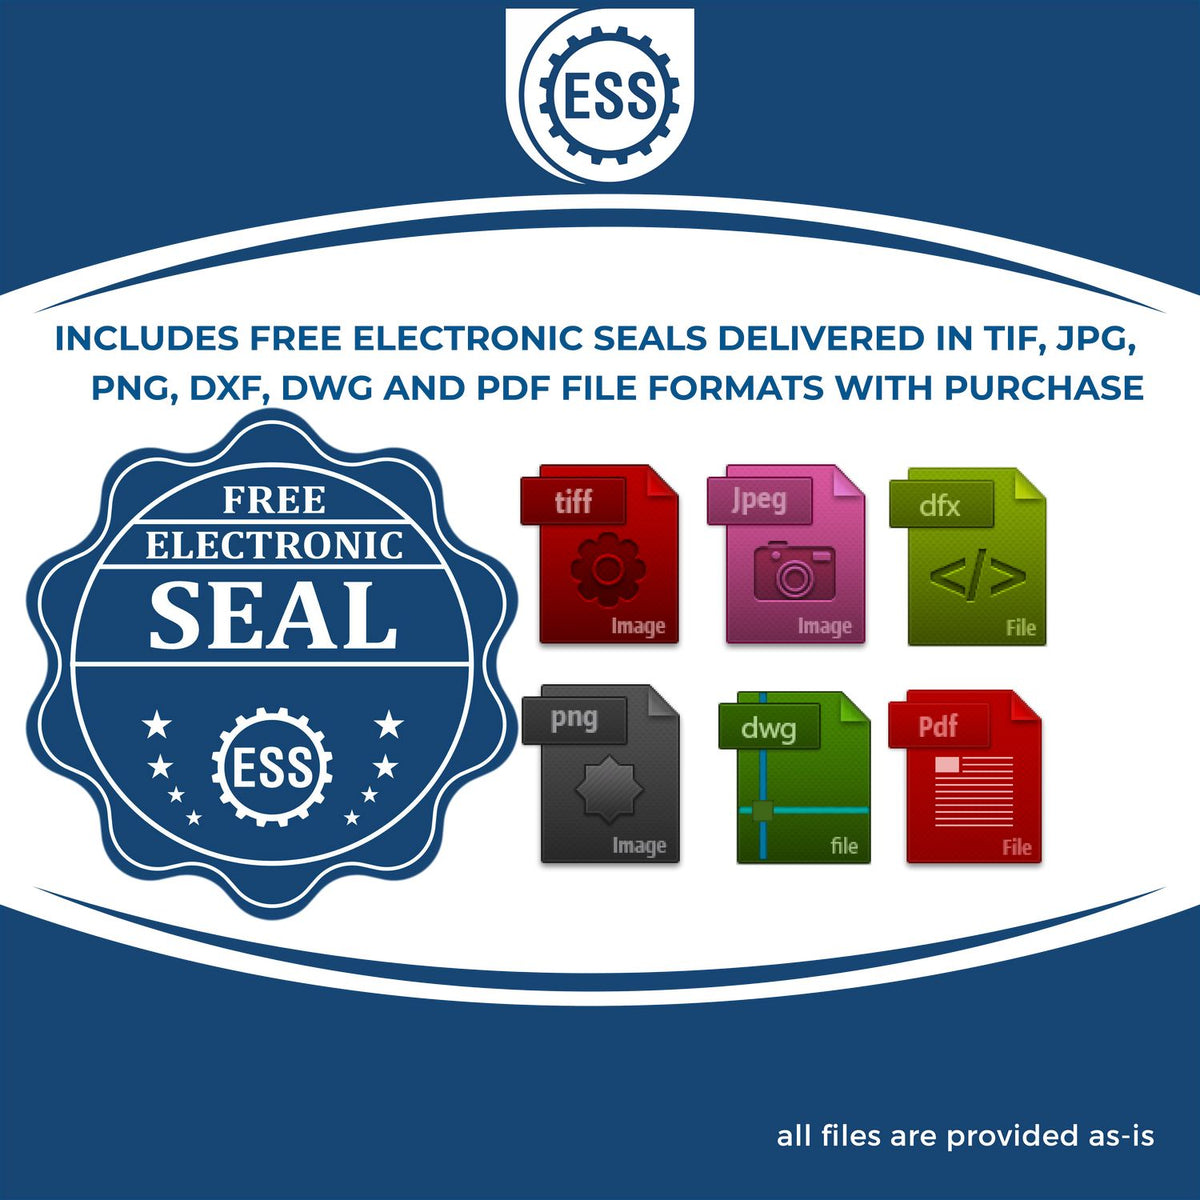 An infographic for the free electronic seal for the Hybrid Oklahoma Architect Seal illustrating the different file type icons such as DXF, DWG, TIF, JPG and PNG.